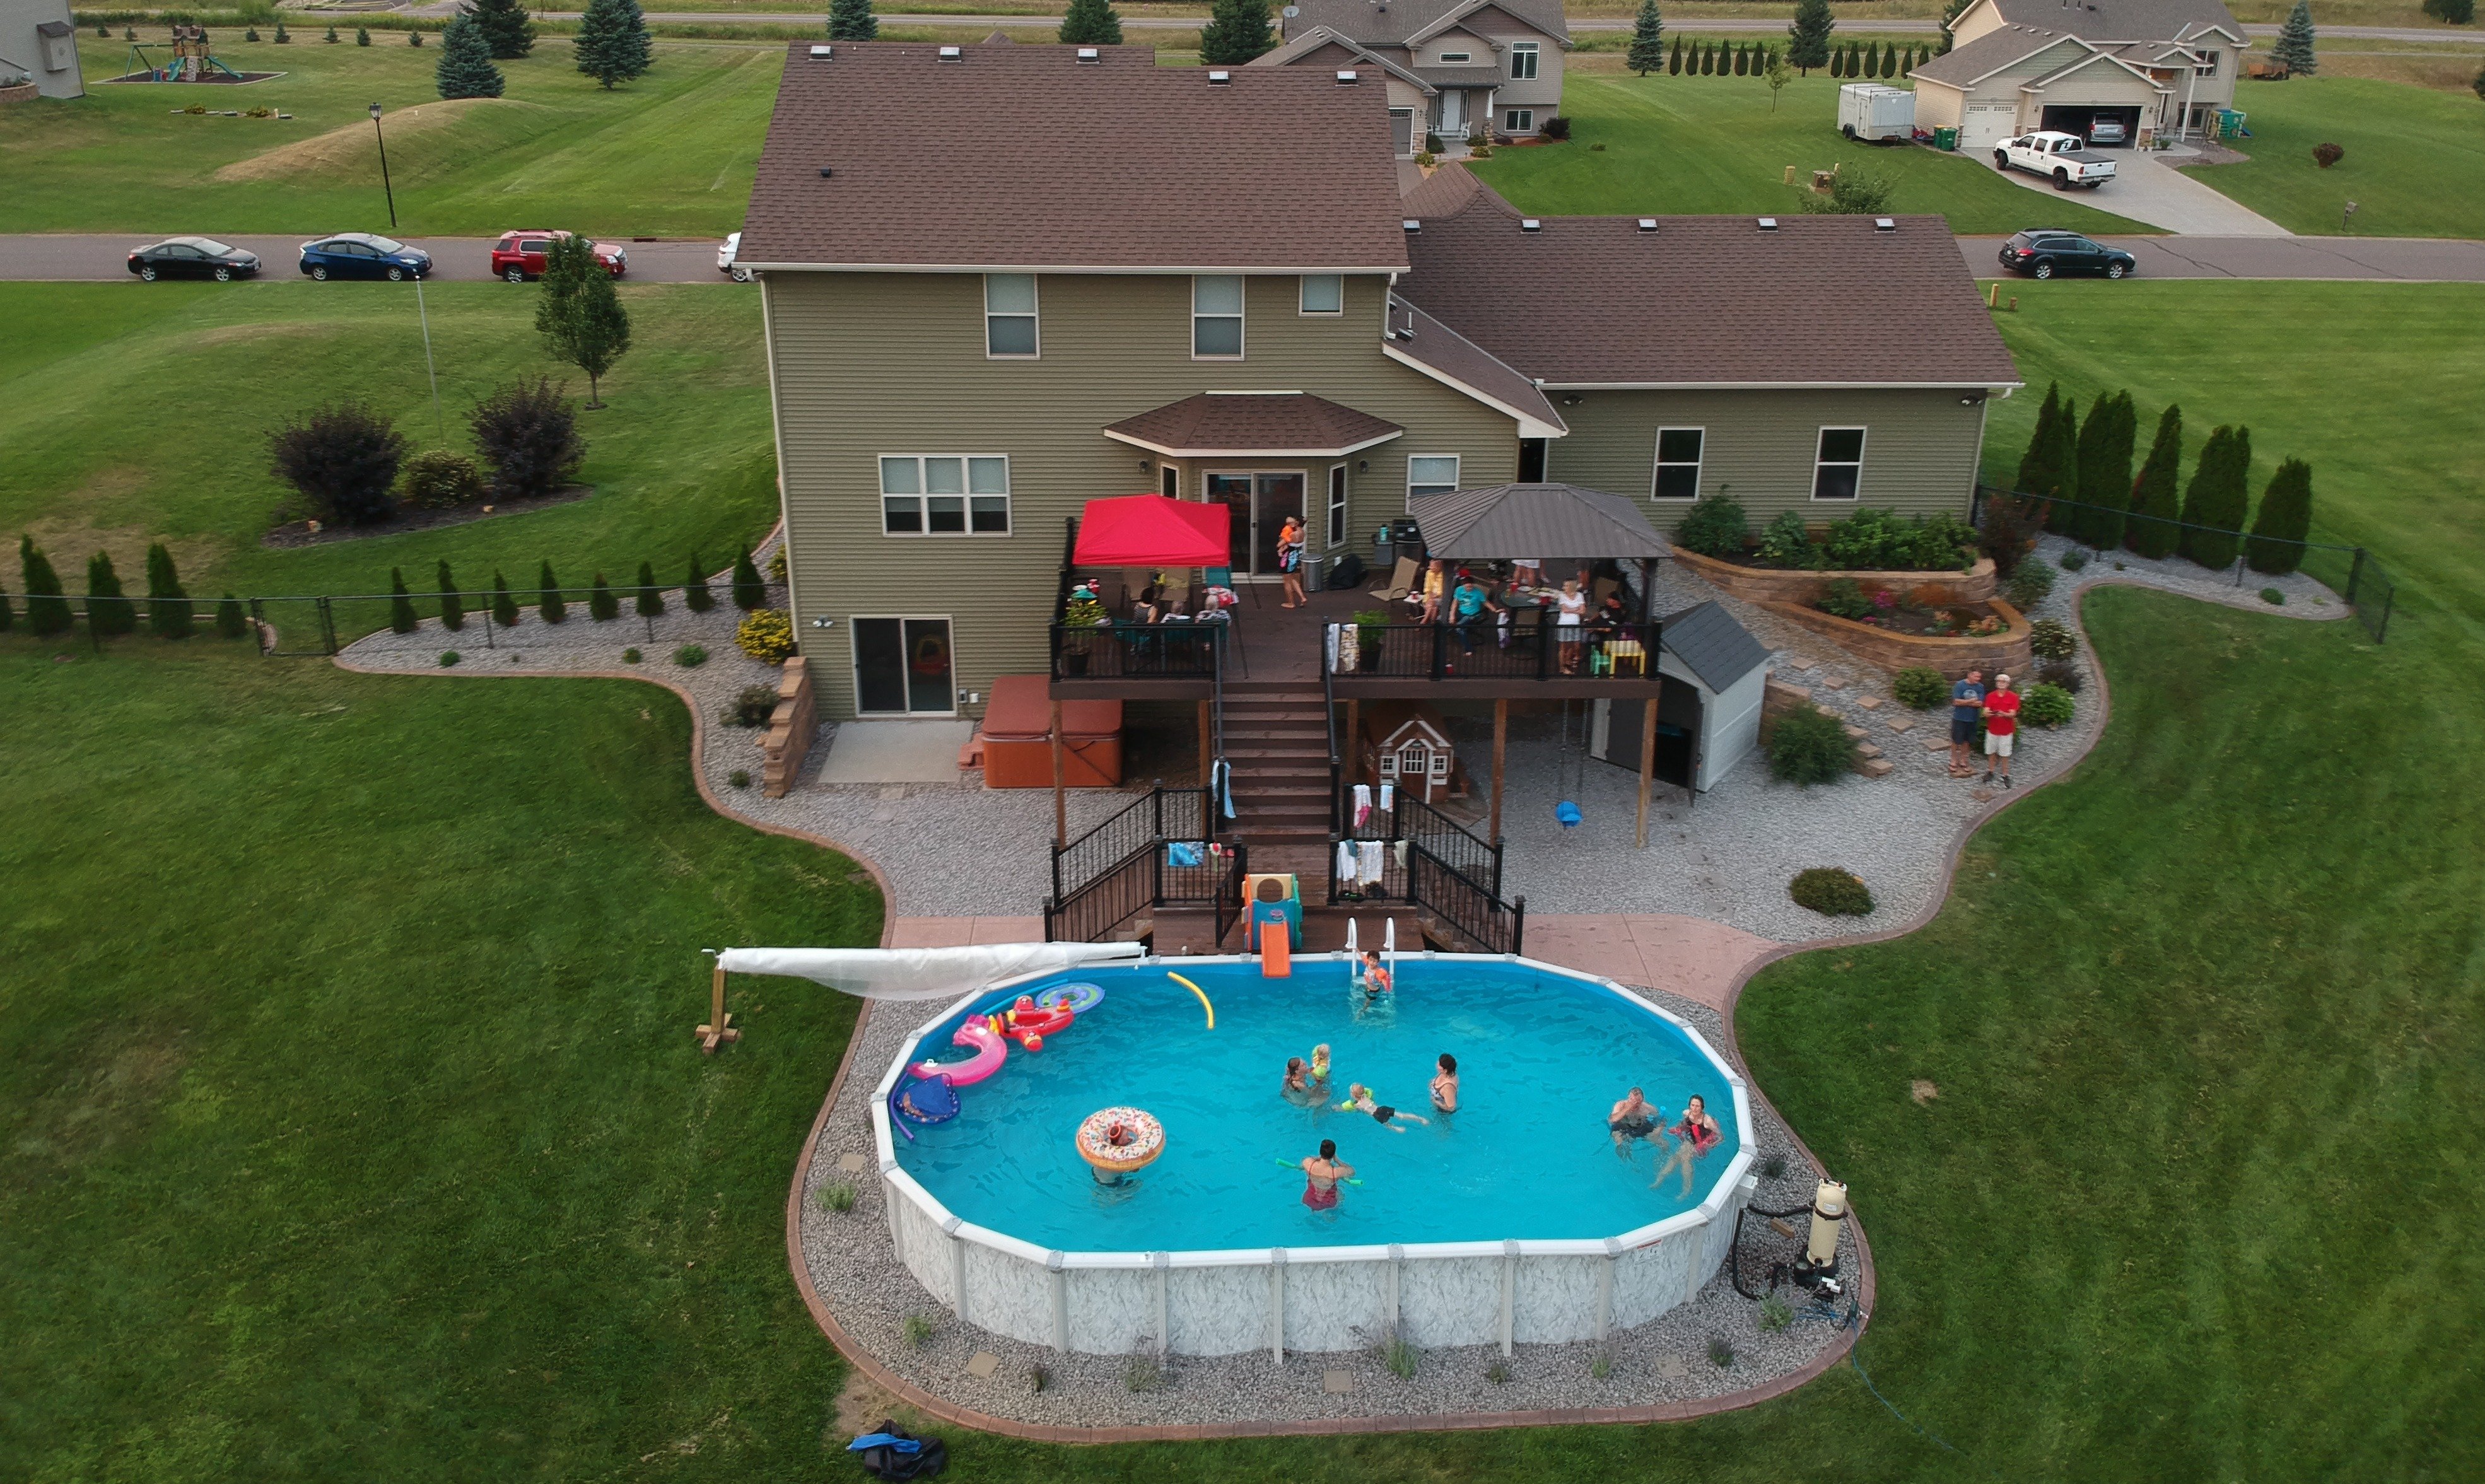 How Much Does An Above Ground Pool Cost to Build?